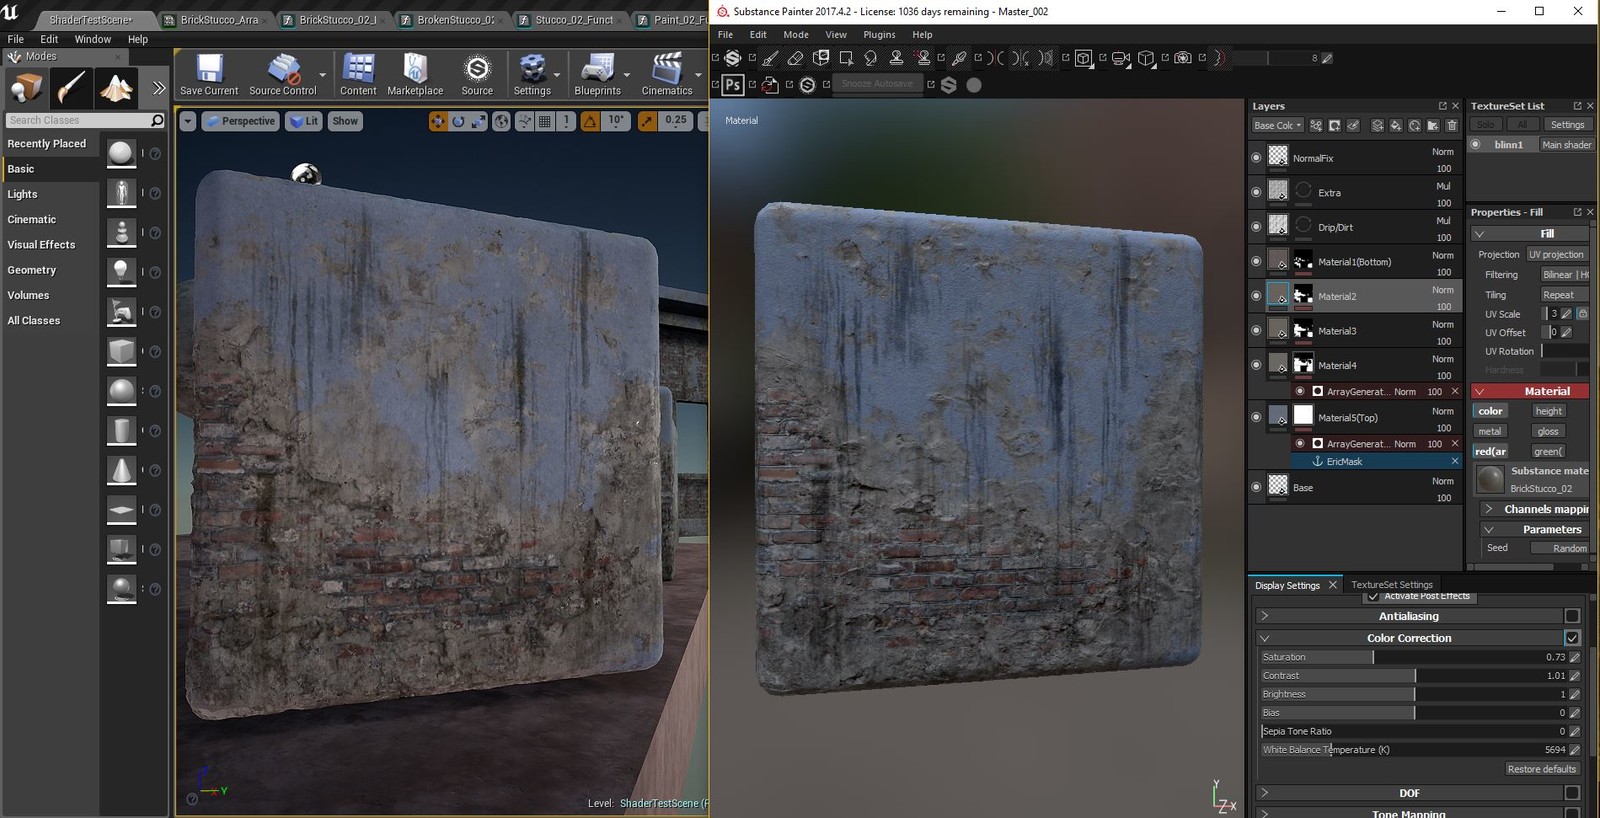 Comparison between painting in substance painter and the result in UE4. 

I basically had to copy the math created in UE4 somehow and make it paint the exact same way inside of Substance painter. I think it worked out successfully. 